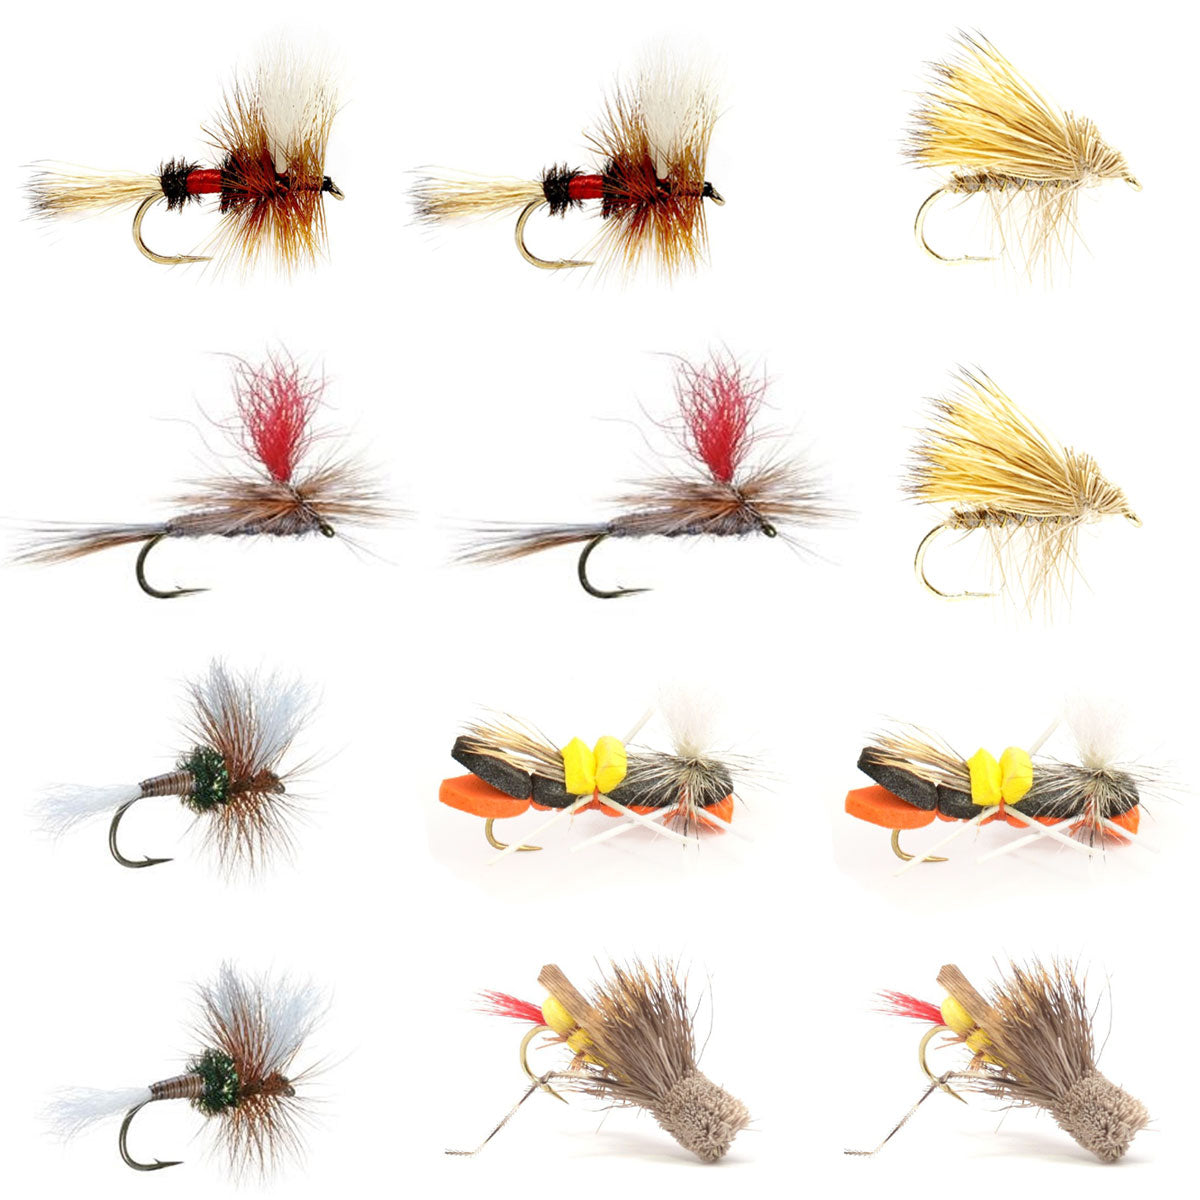 Terrestrial & Attractor Fly Assortment - Hand Tied Flies - Fly Fishing  Gifts - Fly Assortments - Dry Fly Attractors